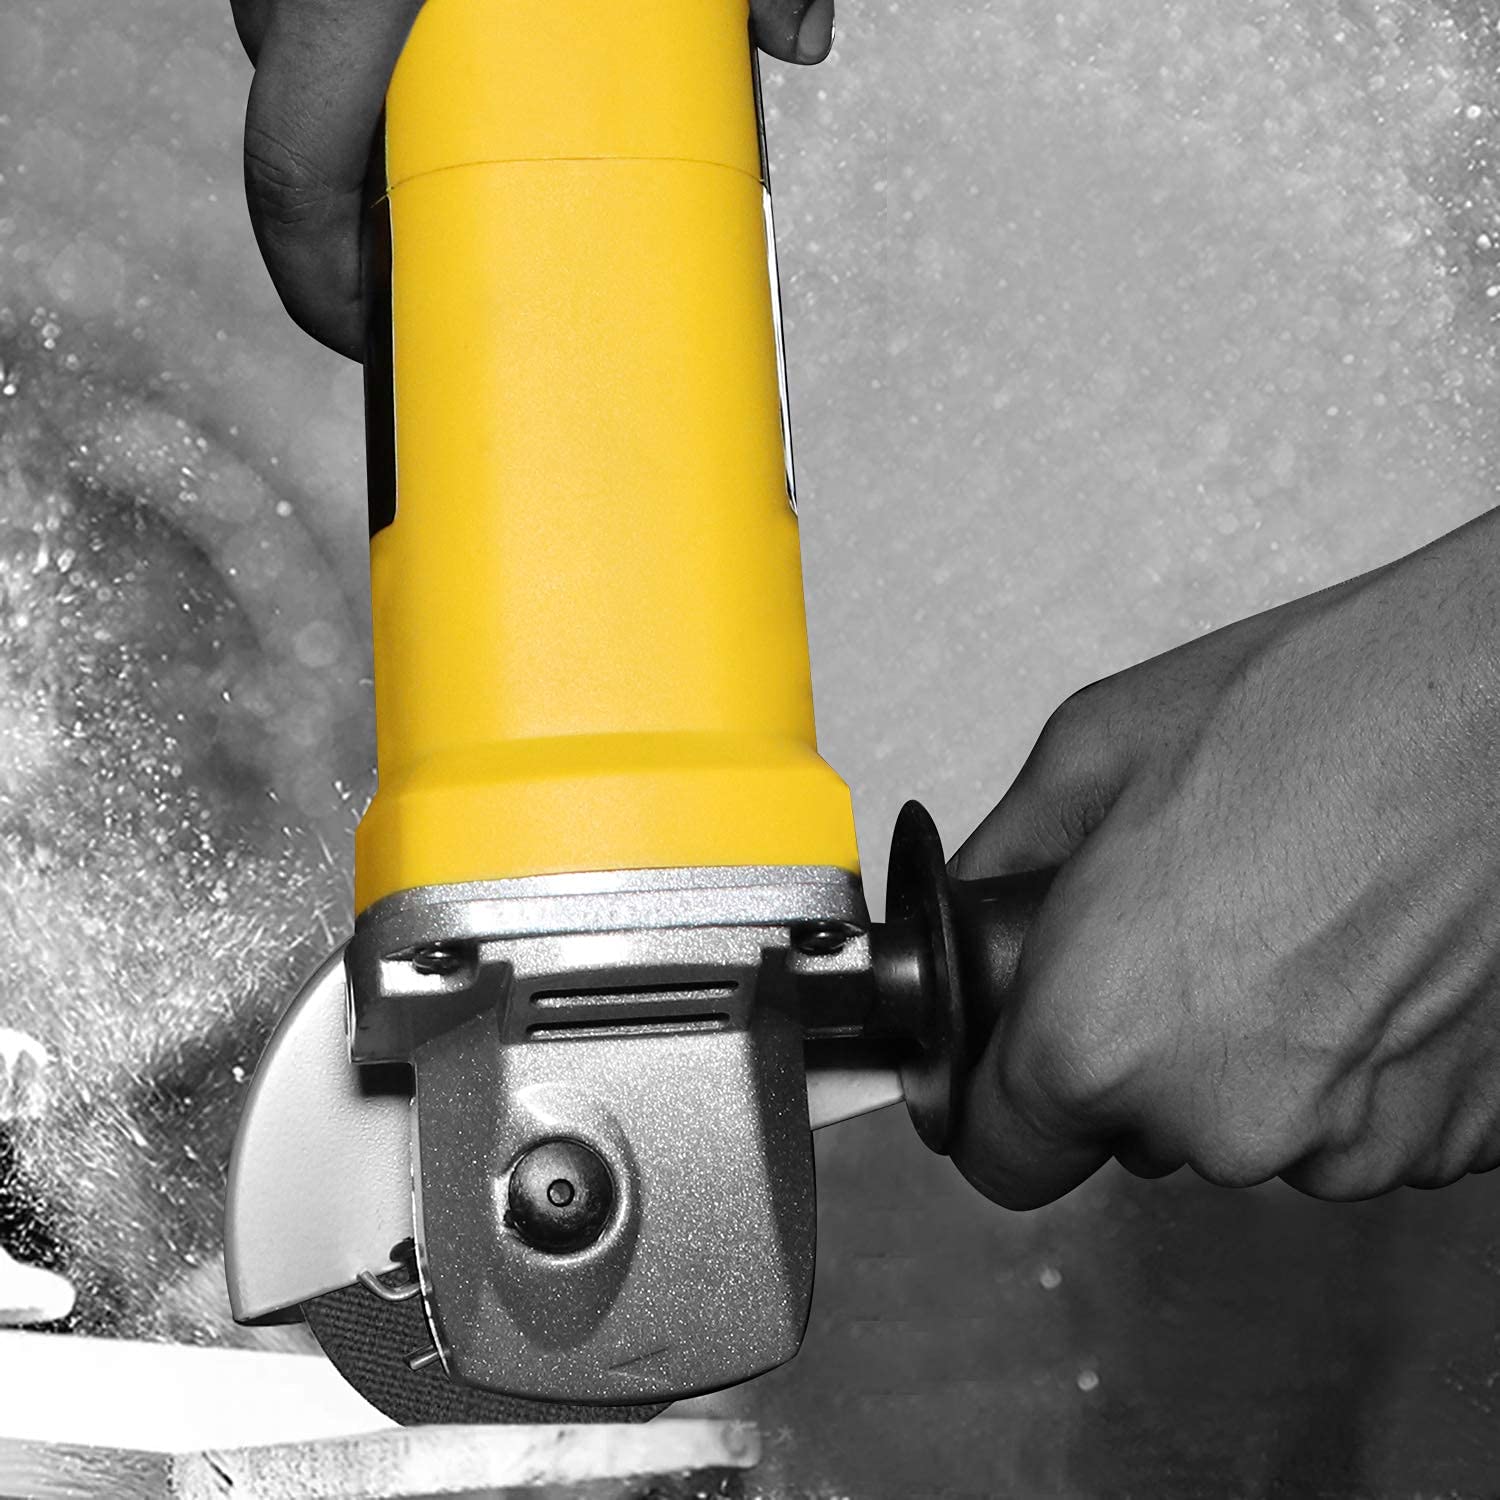 Cheston Angle Grinder for Grinding, Cutting, Polishing (4 inch/100mm), 850W Yellow Grinder Machine with Auxiliary Handle (Pack of 8)